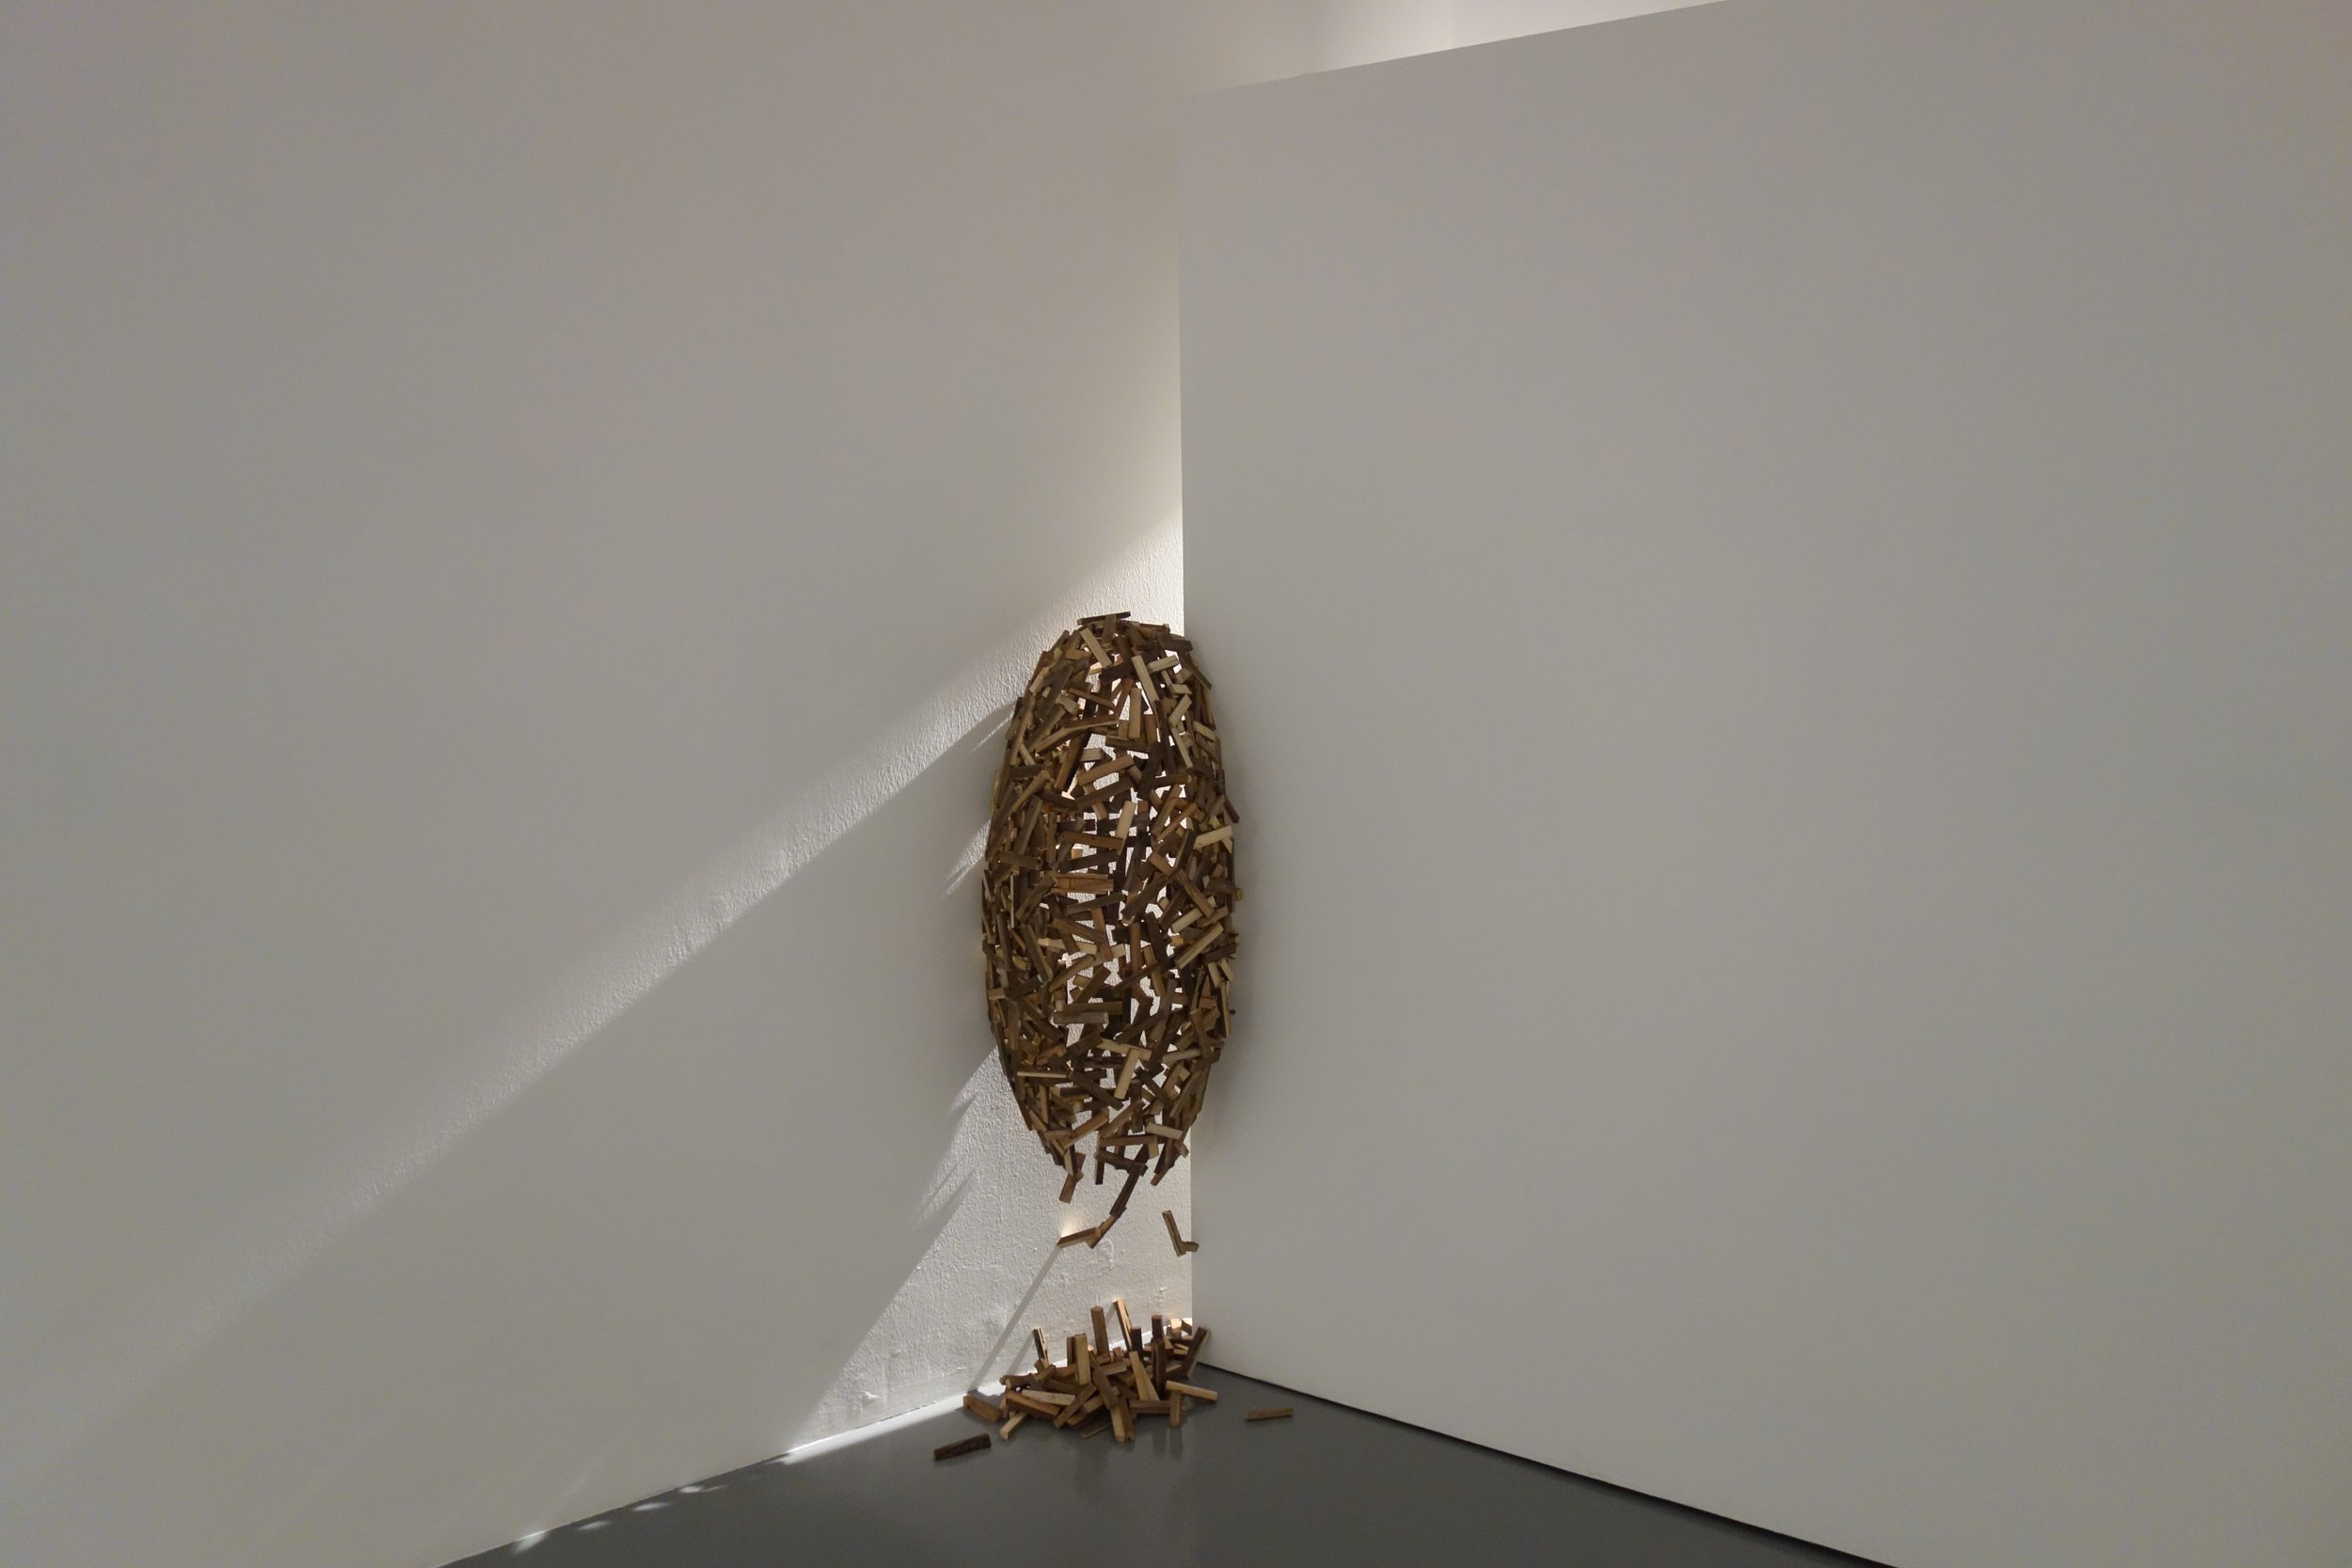  &nbsp;Bernardo Pacquing&nbsp;   Termite Mound #2   2023  Found wood  Dimensions variable  Site-specific commission 